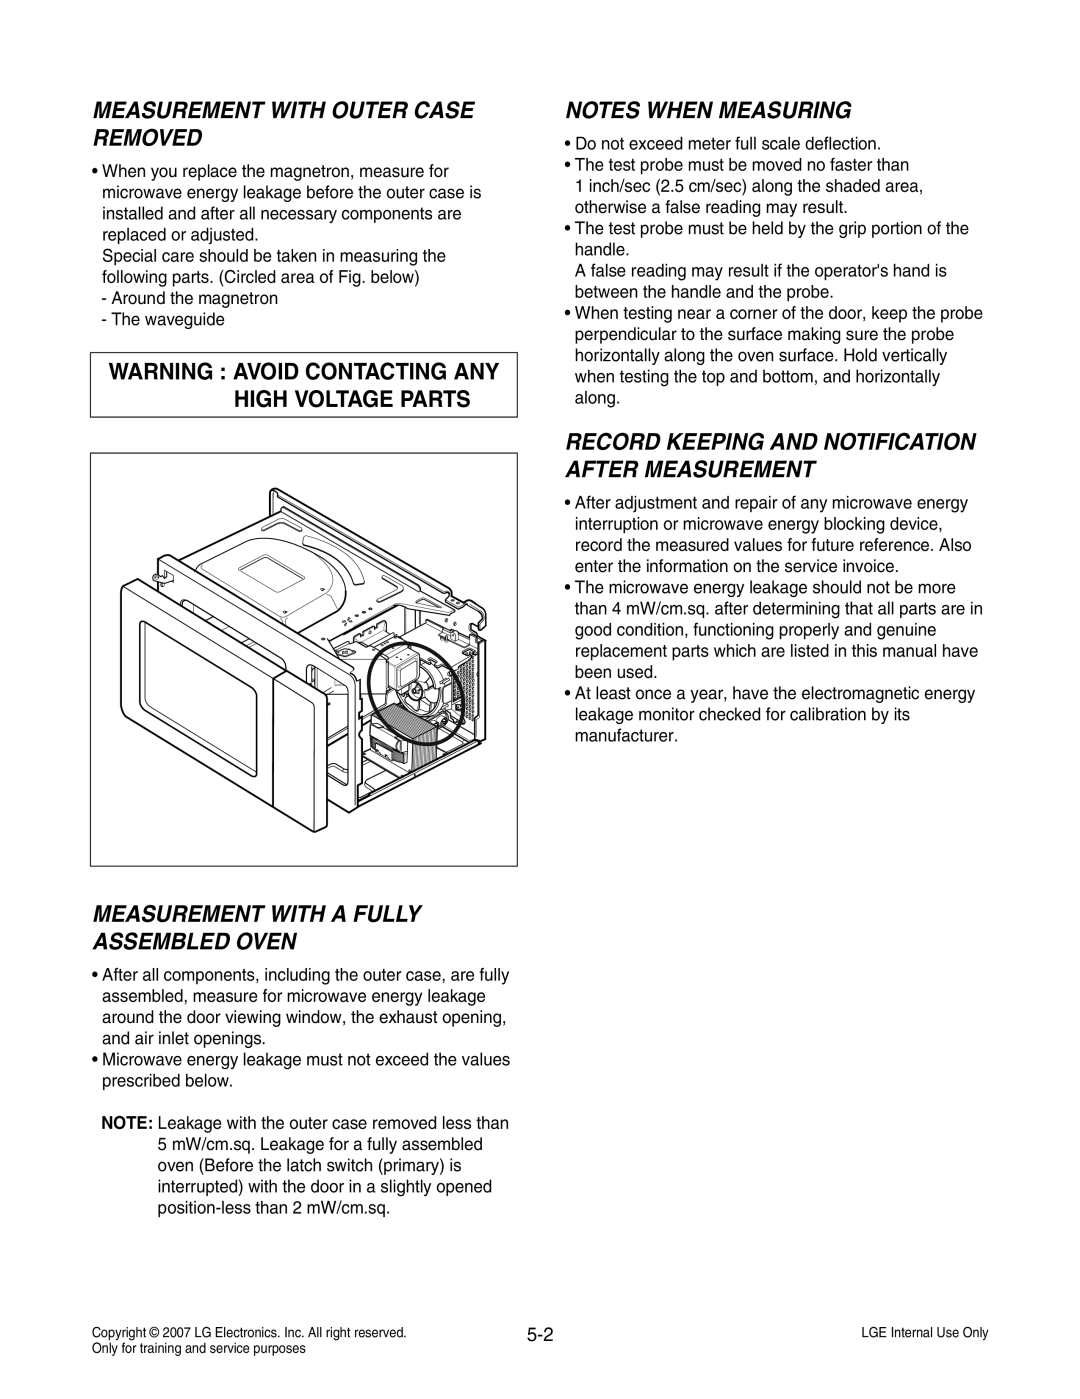 LG Electronics MS3447GRS service manual Measurement With Outer Case Removed, Measurement With A Fully Assembled Oven 